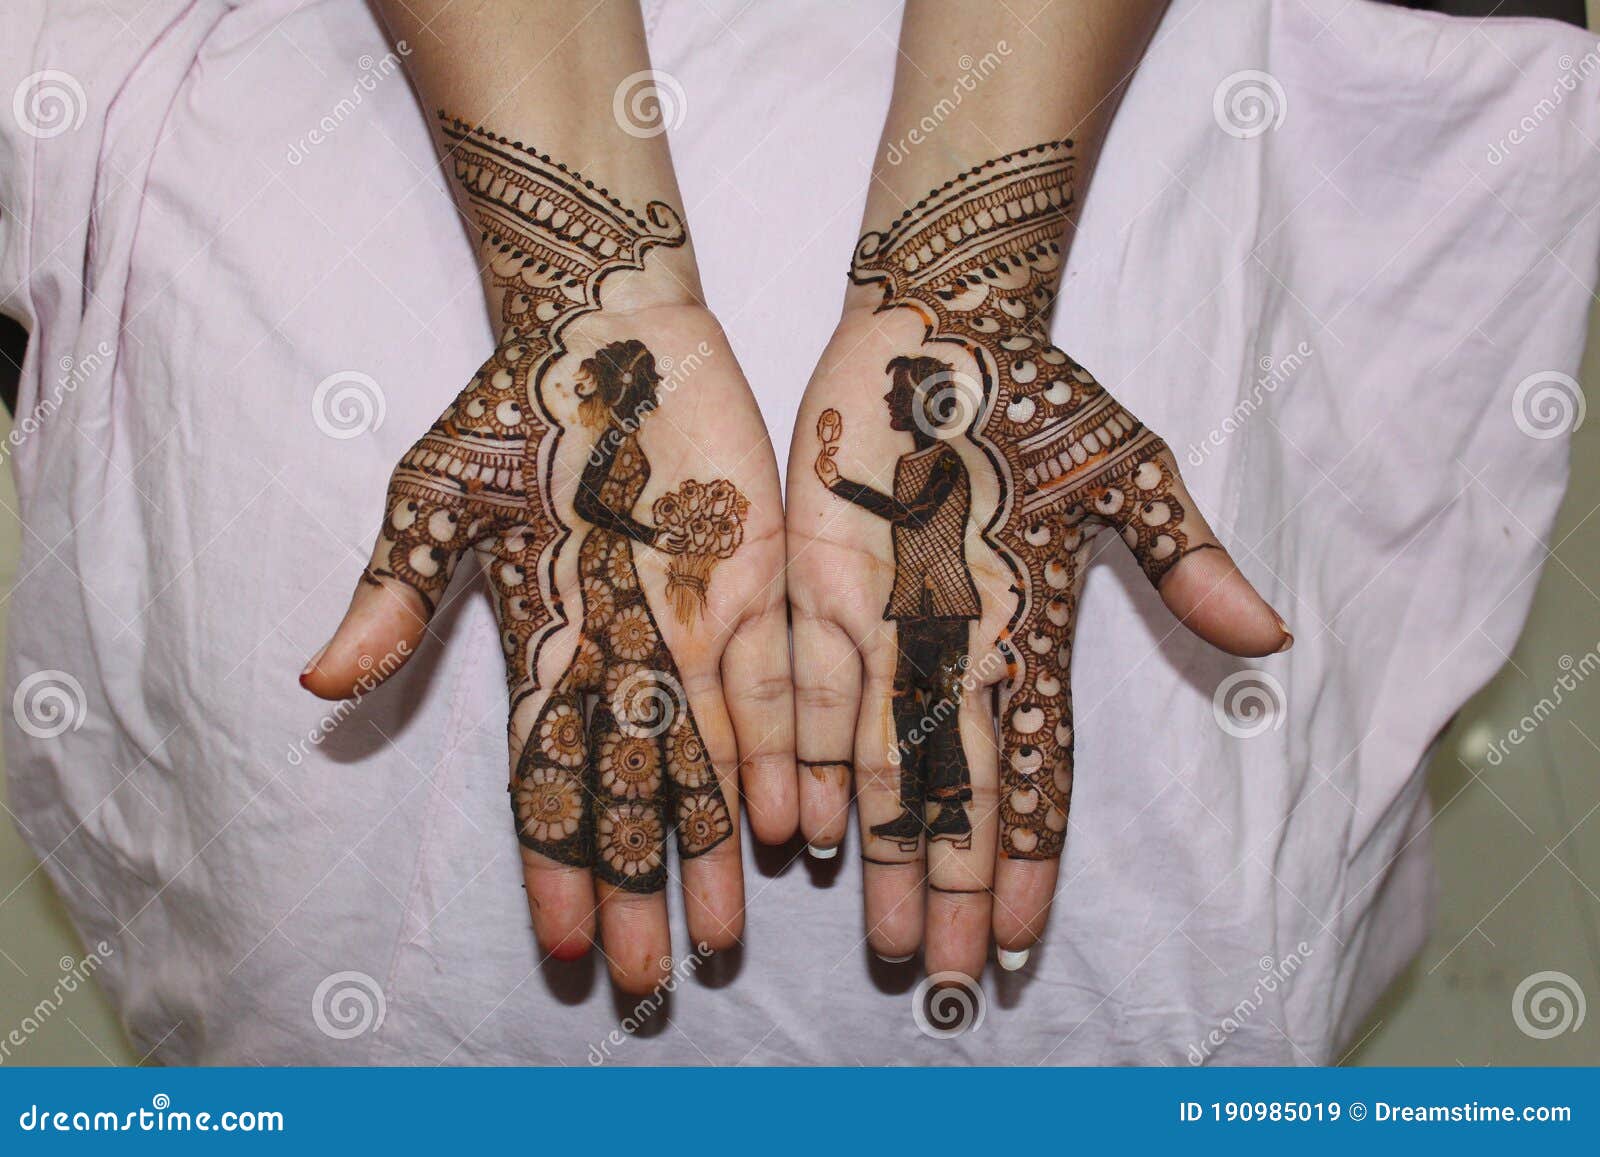 Boy Proposing Girl with Ring-Indian Traditional Henna Design ...